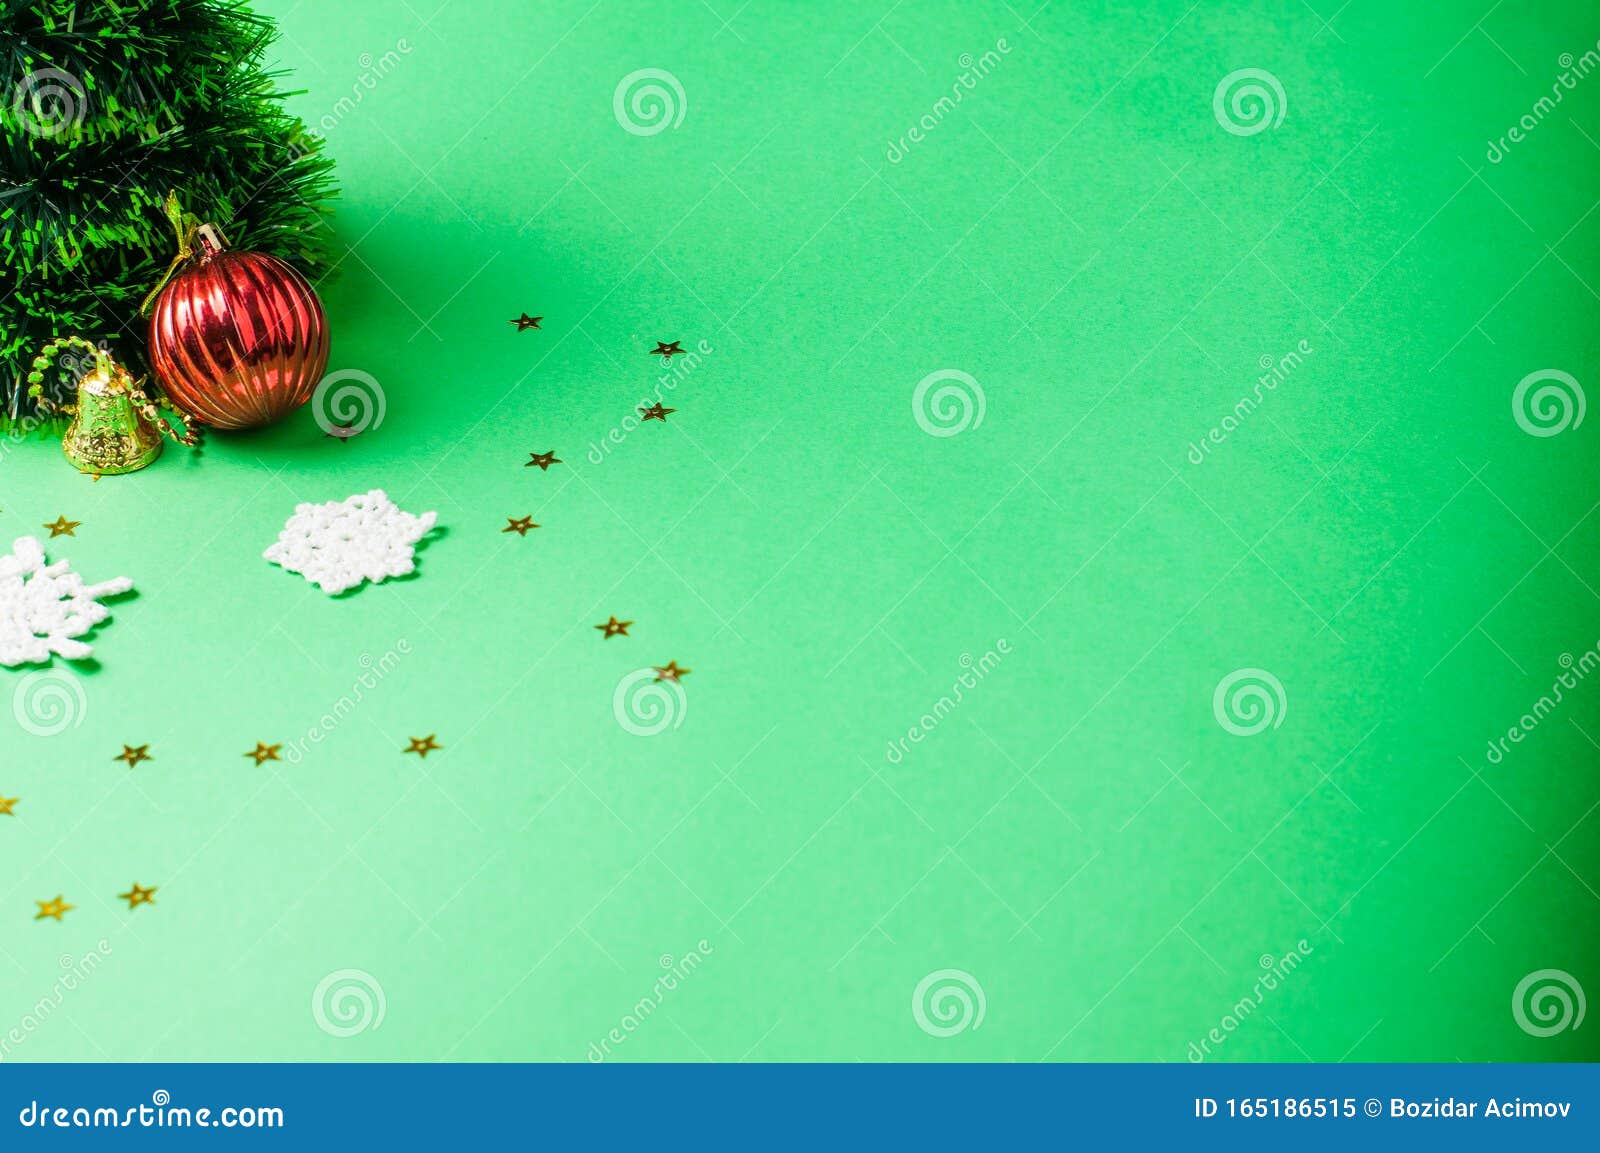 Christmas Decoration on the Green Background. Ornaments, Snowflakes ...